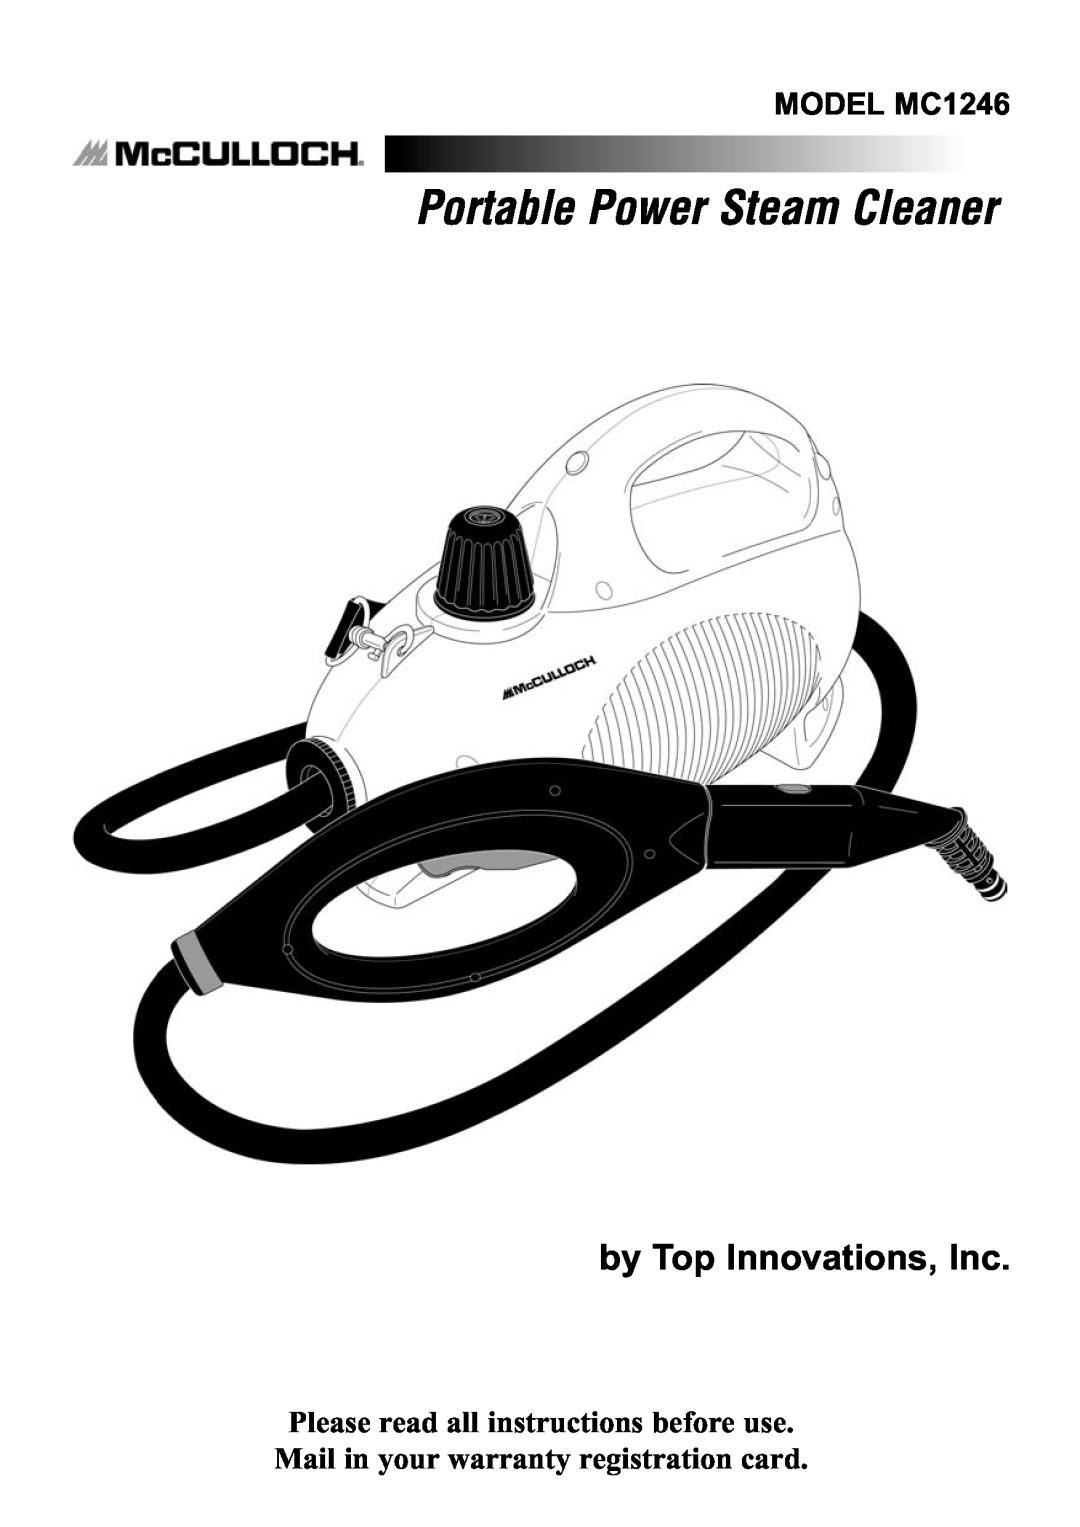 Top Innovations warranty Portable Power Steam Cleaner, by Top Innovations, Inc, MODEL MC1246 